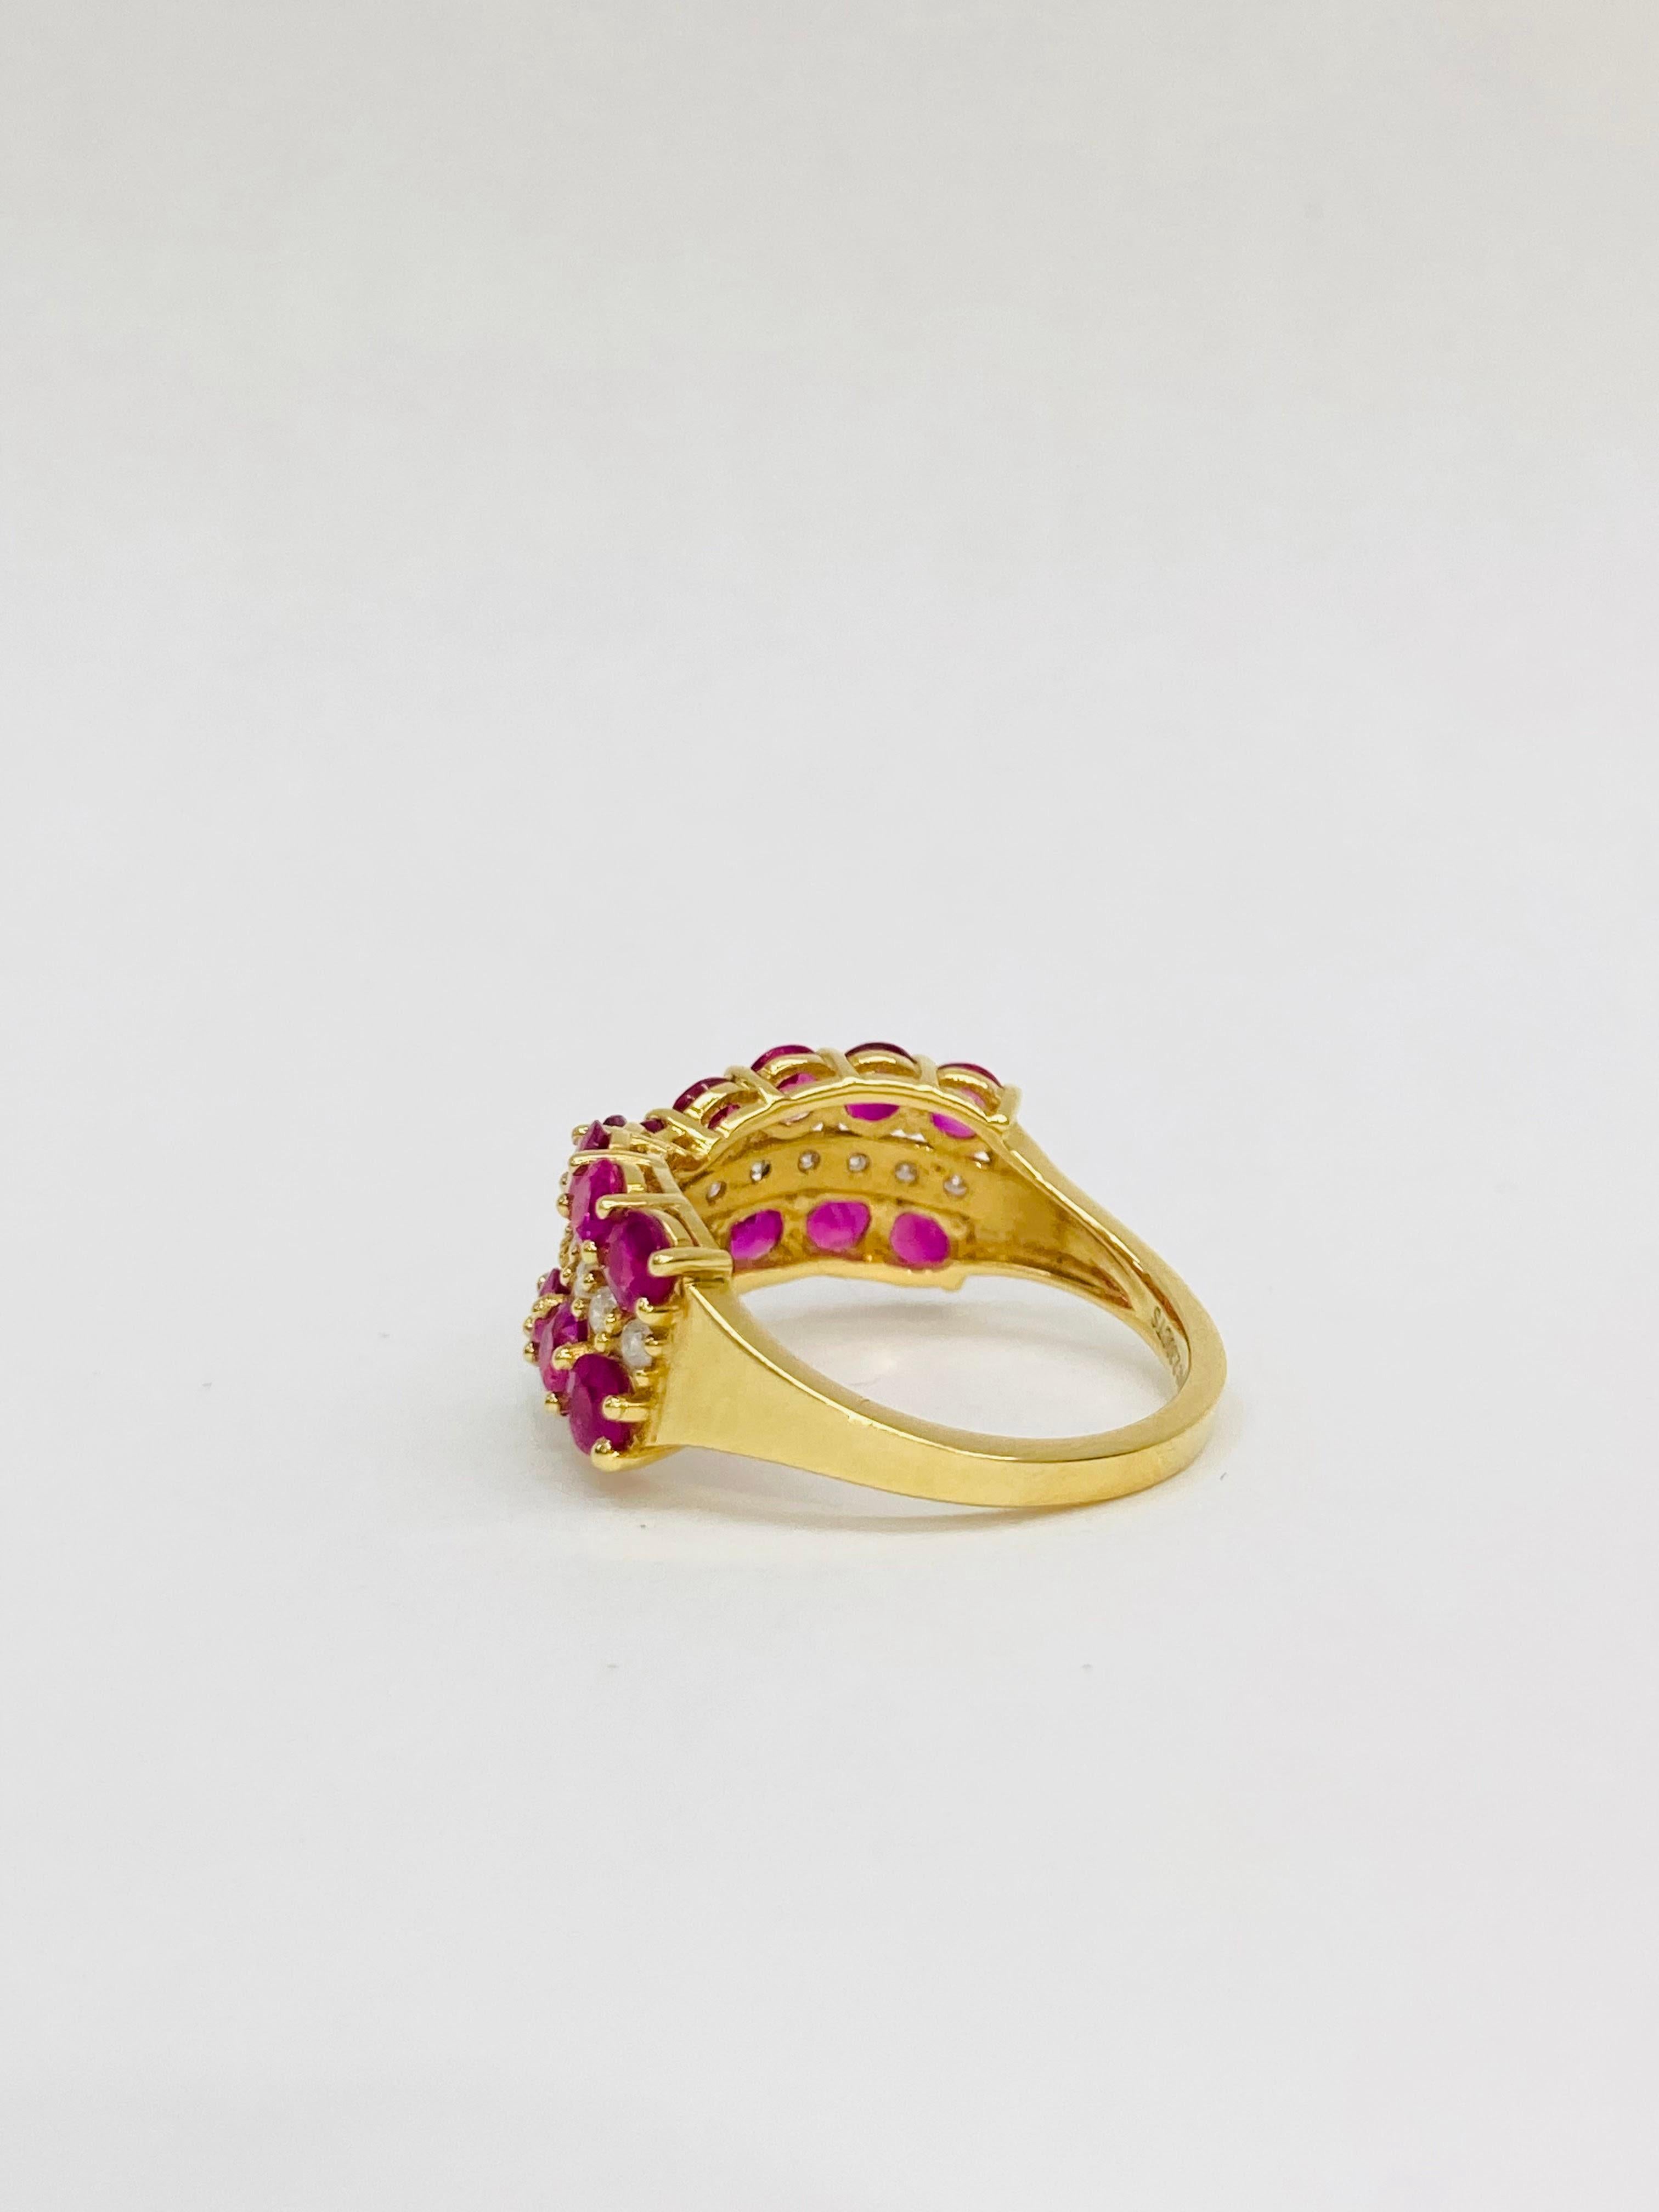  Bochic 2 Color “Retro Vintage” Ruby & Diamond  & 18K Gold Cluster Ring. For Sale 1